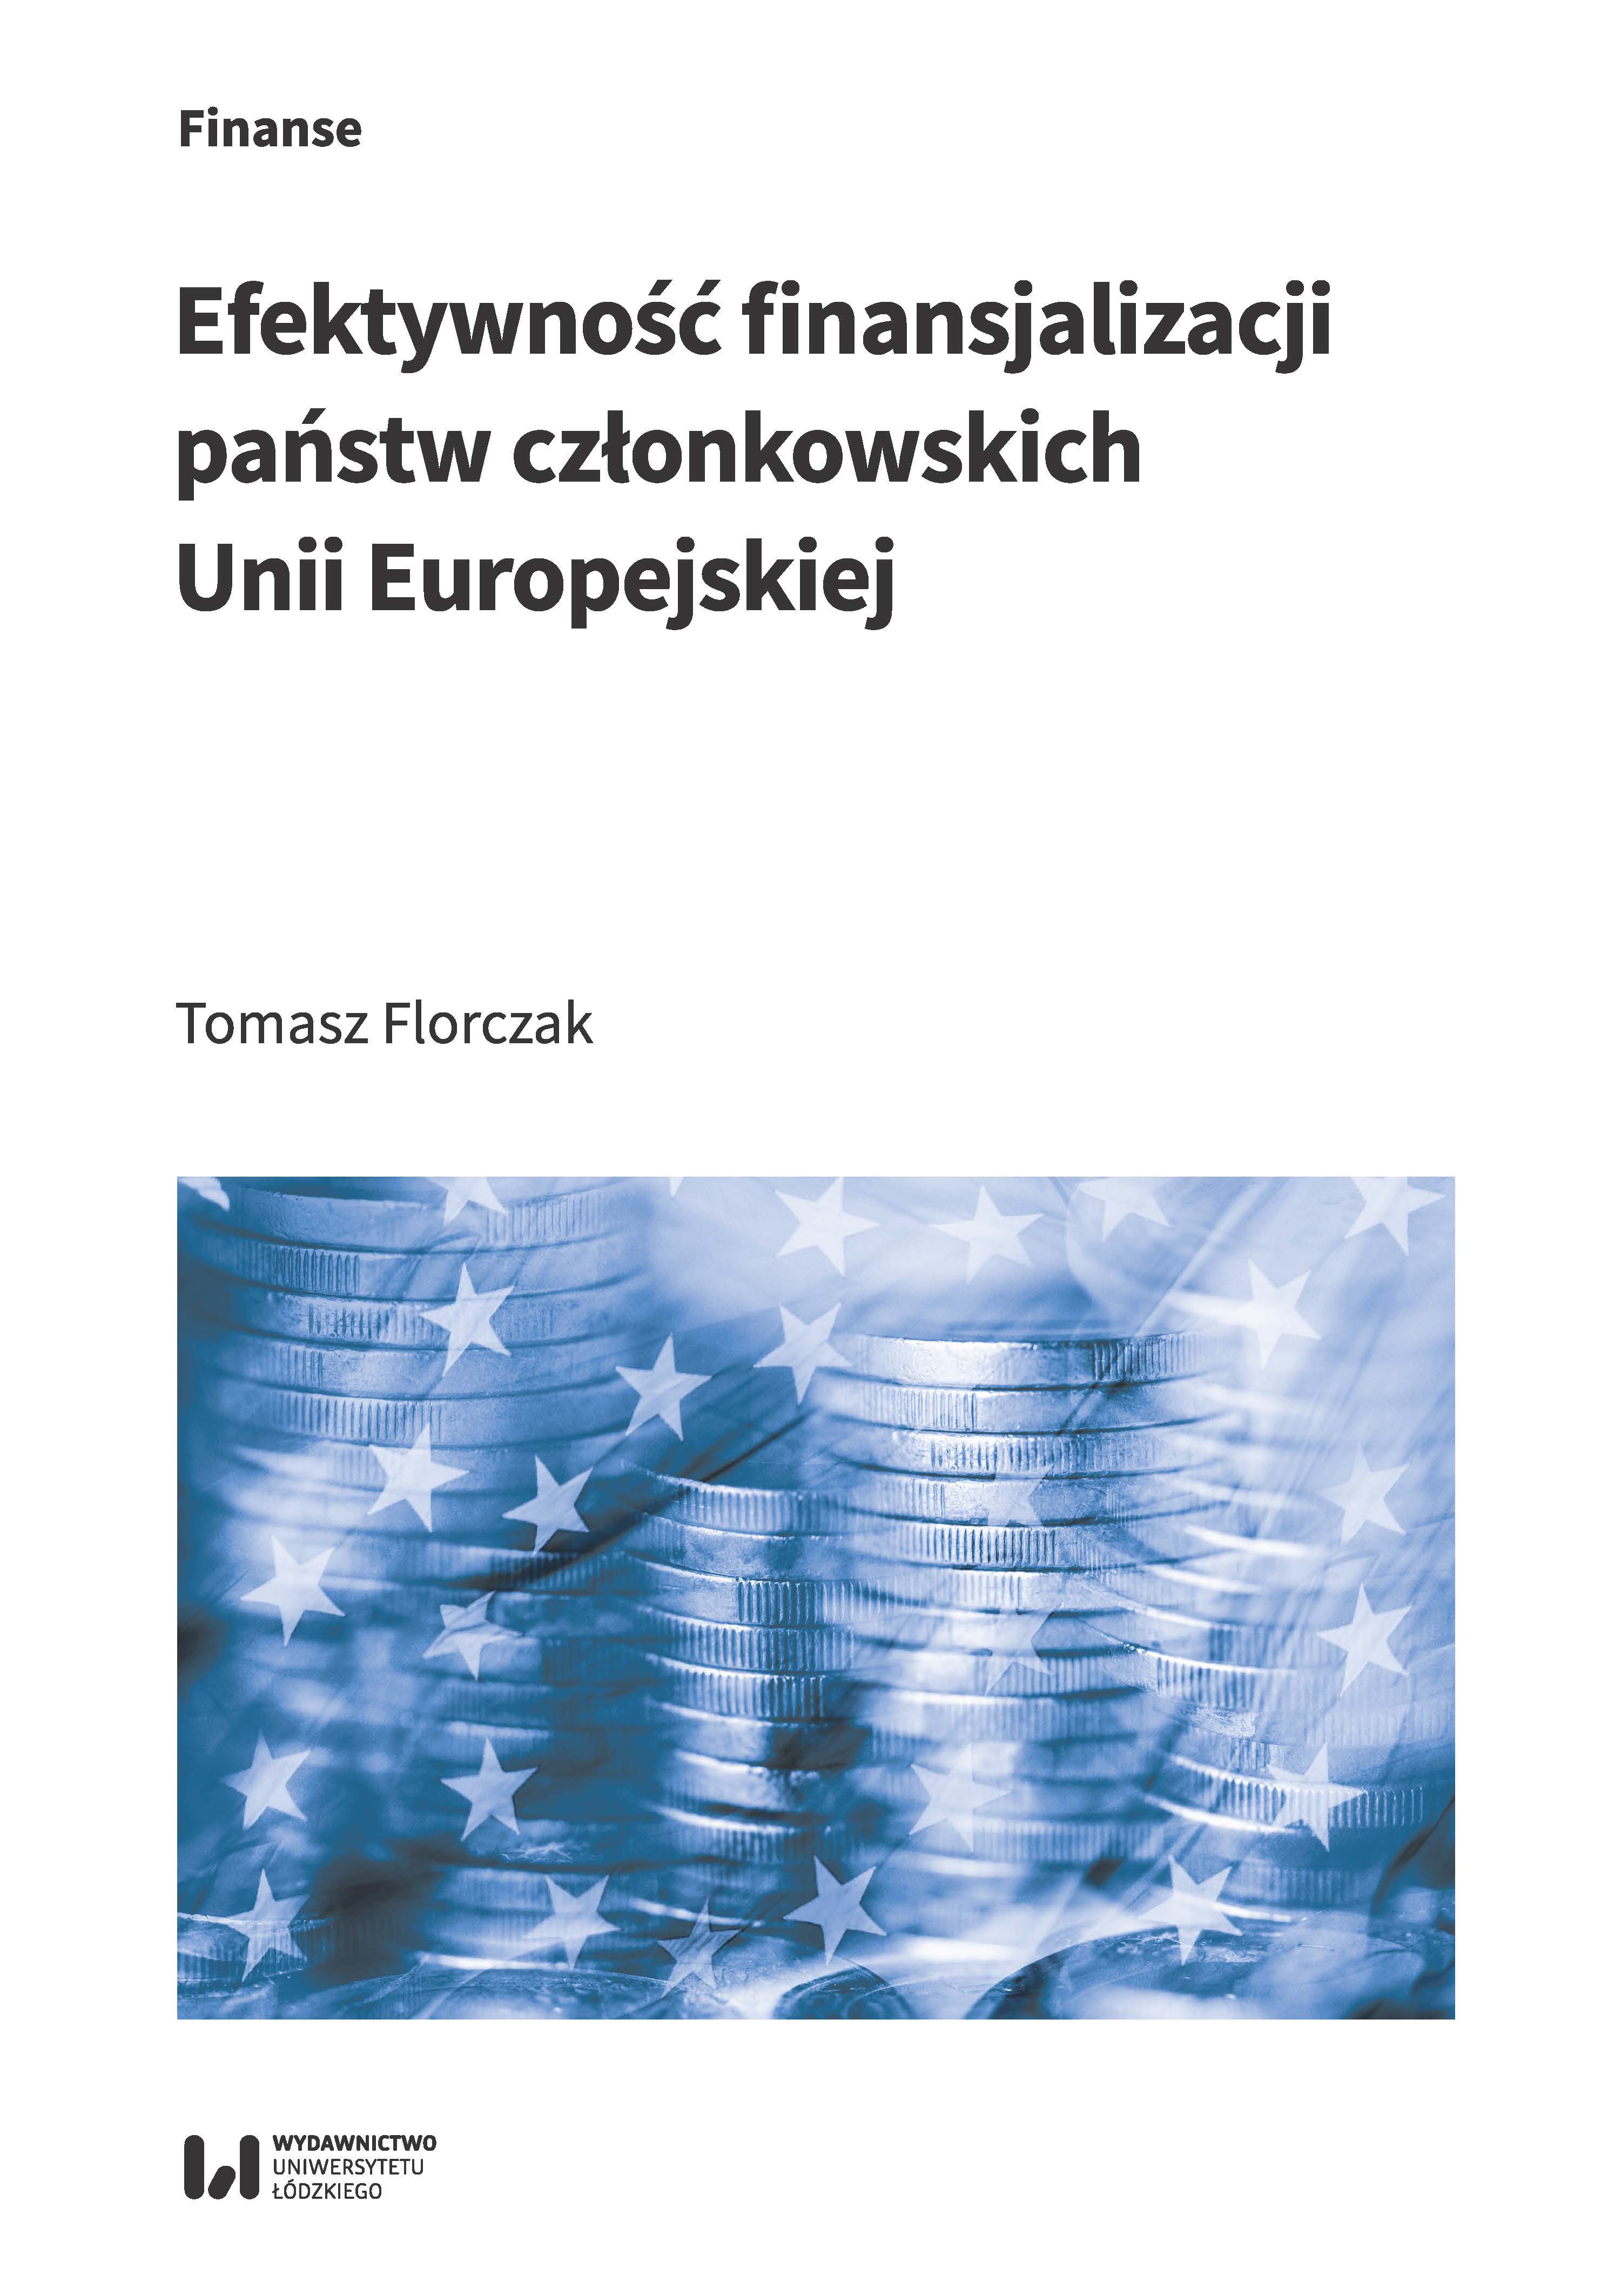 Efficiency of financialization in the Member States of the European Union